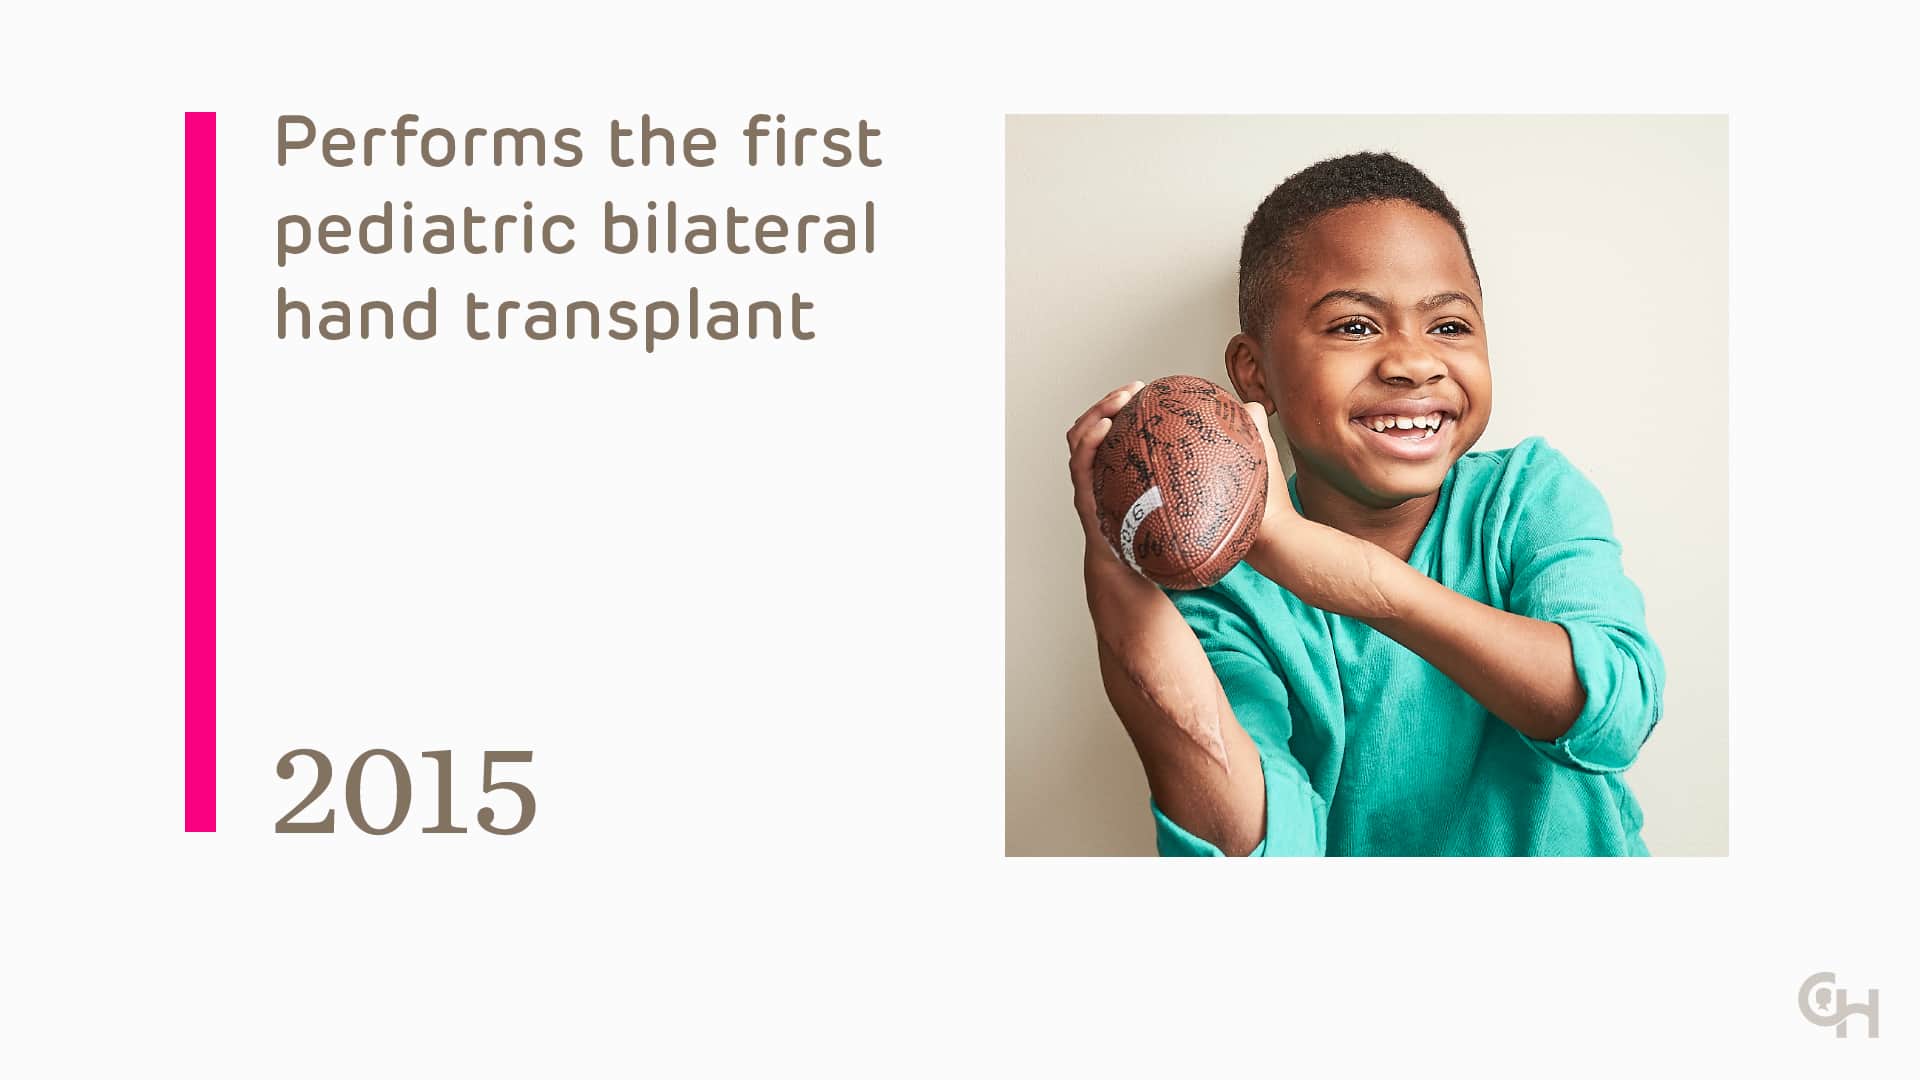 Performs the first pediatric bilateral hand transplant - 2015